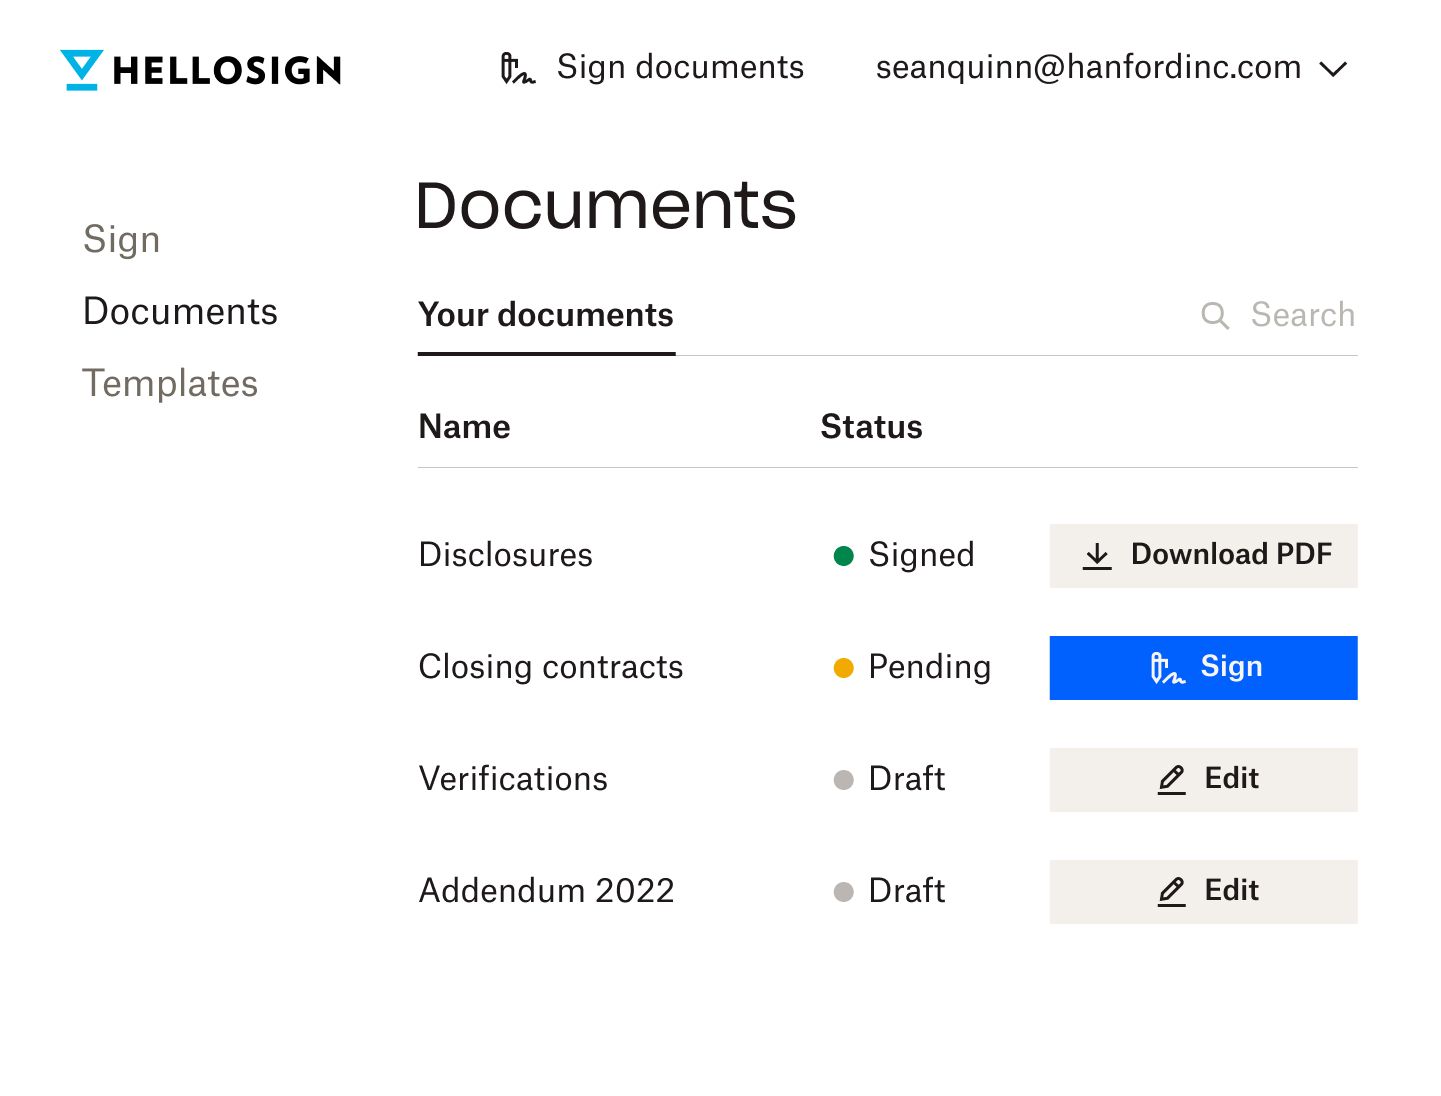 A list of files saved in HelloSign that have different completion statuses